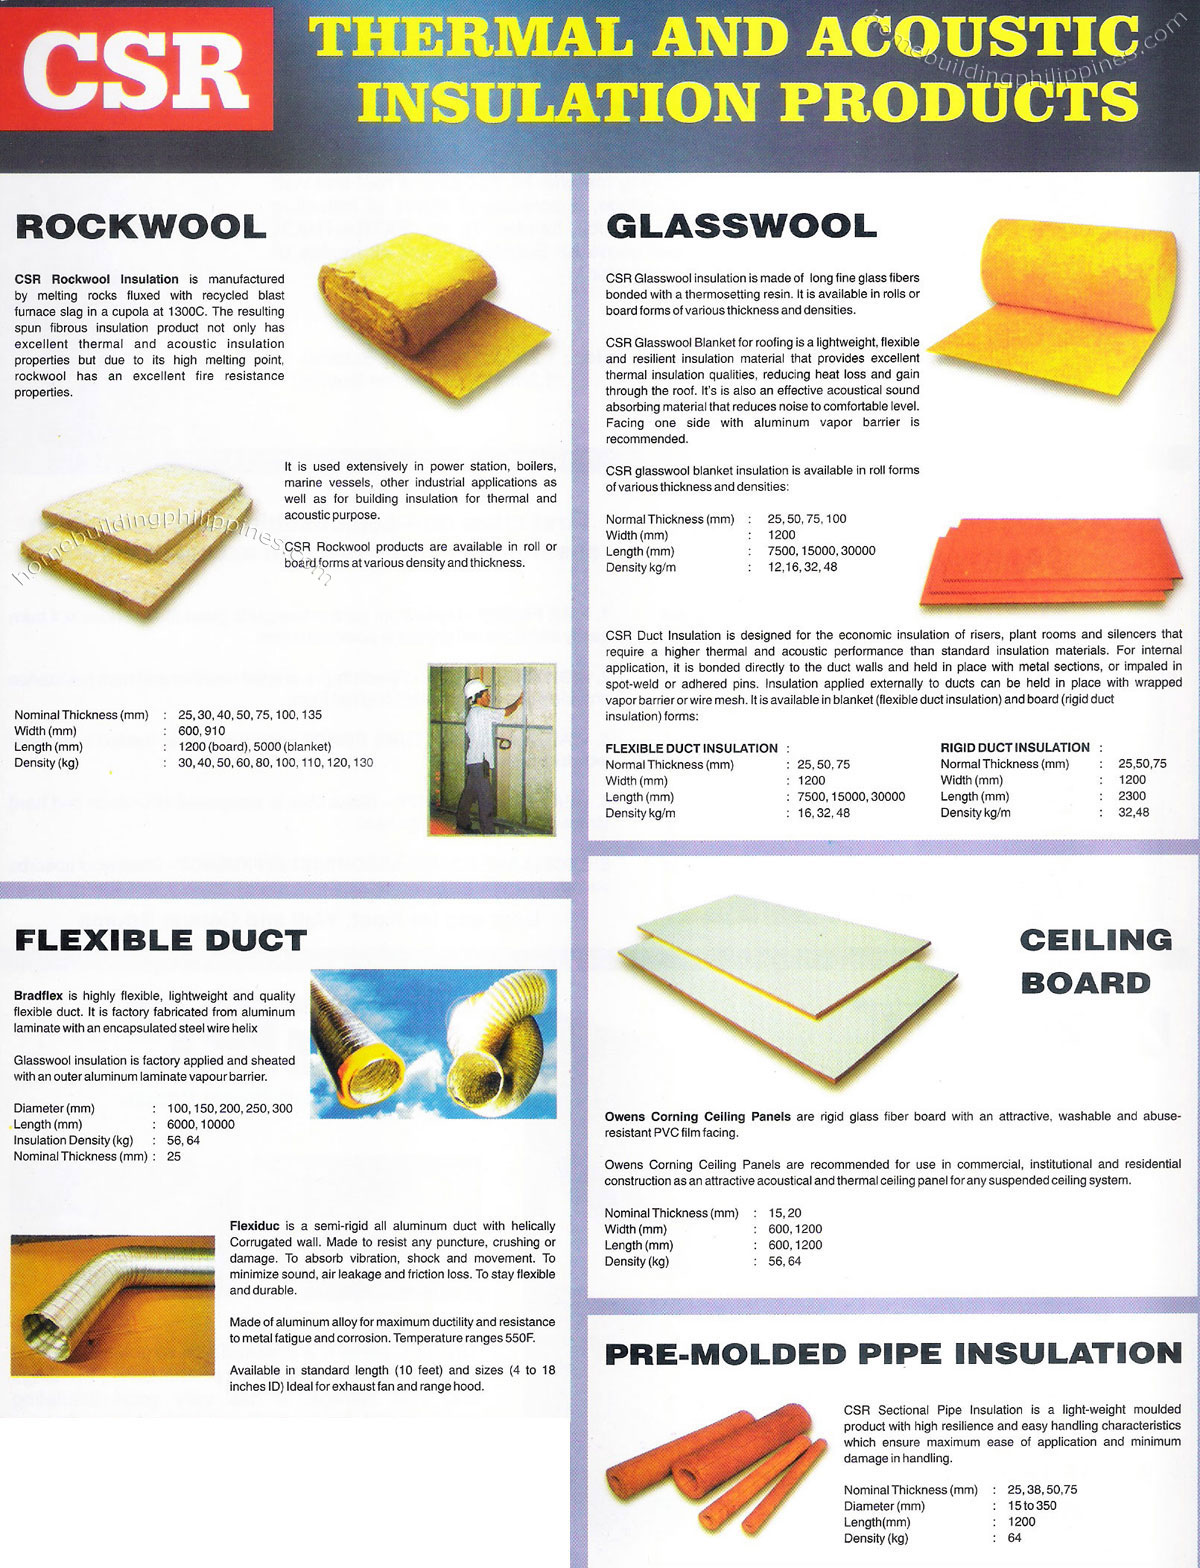 CSR Thermal and Acoustic Insulation Rockwool Glasswool Flexible Duct Ceiling Board Premolded Pipe Insulation